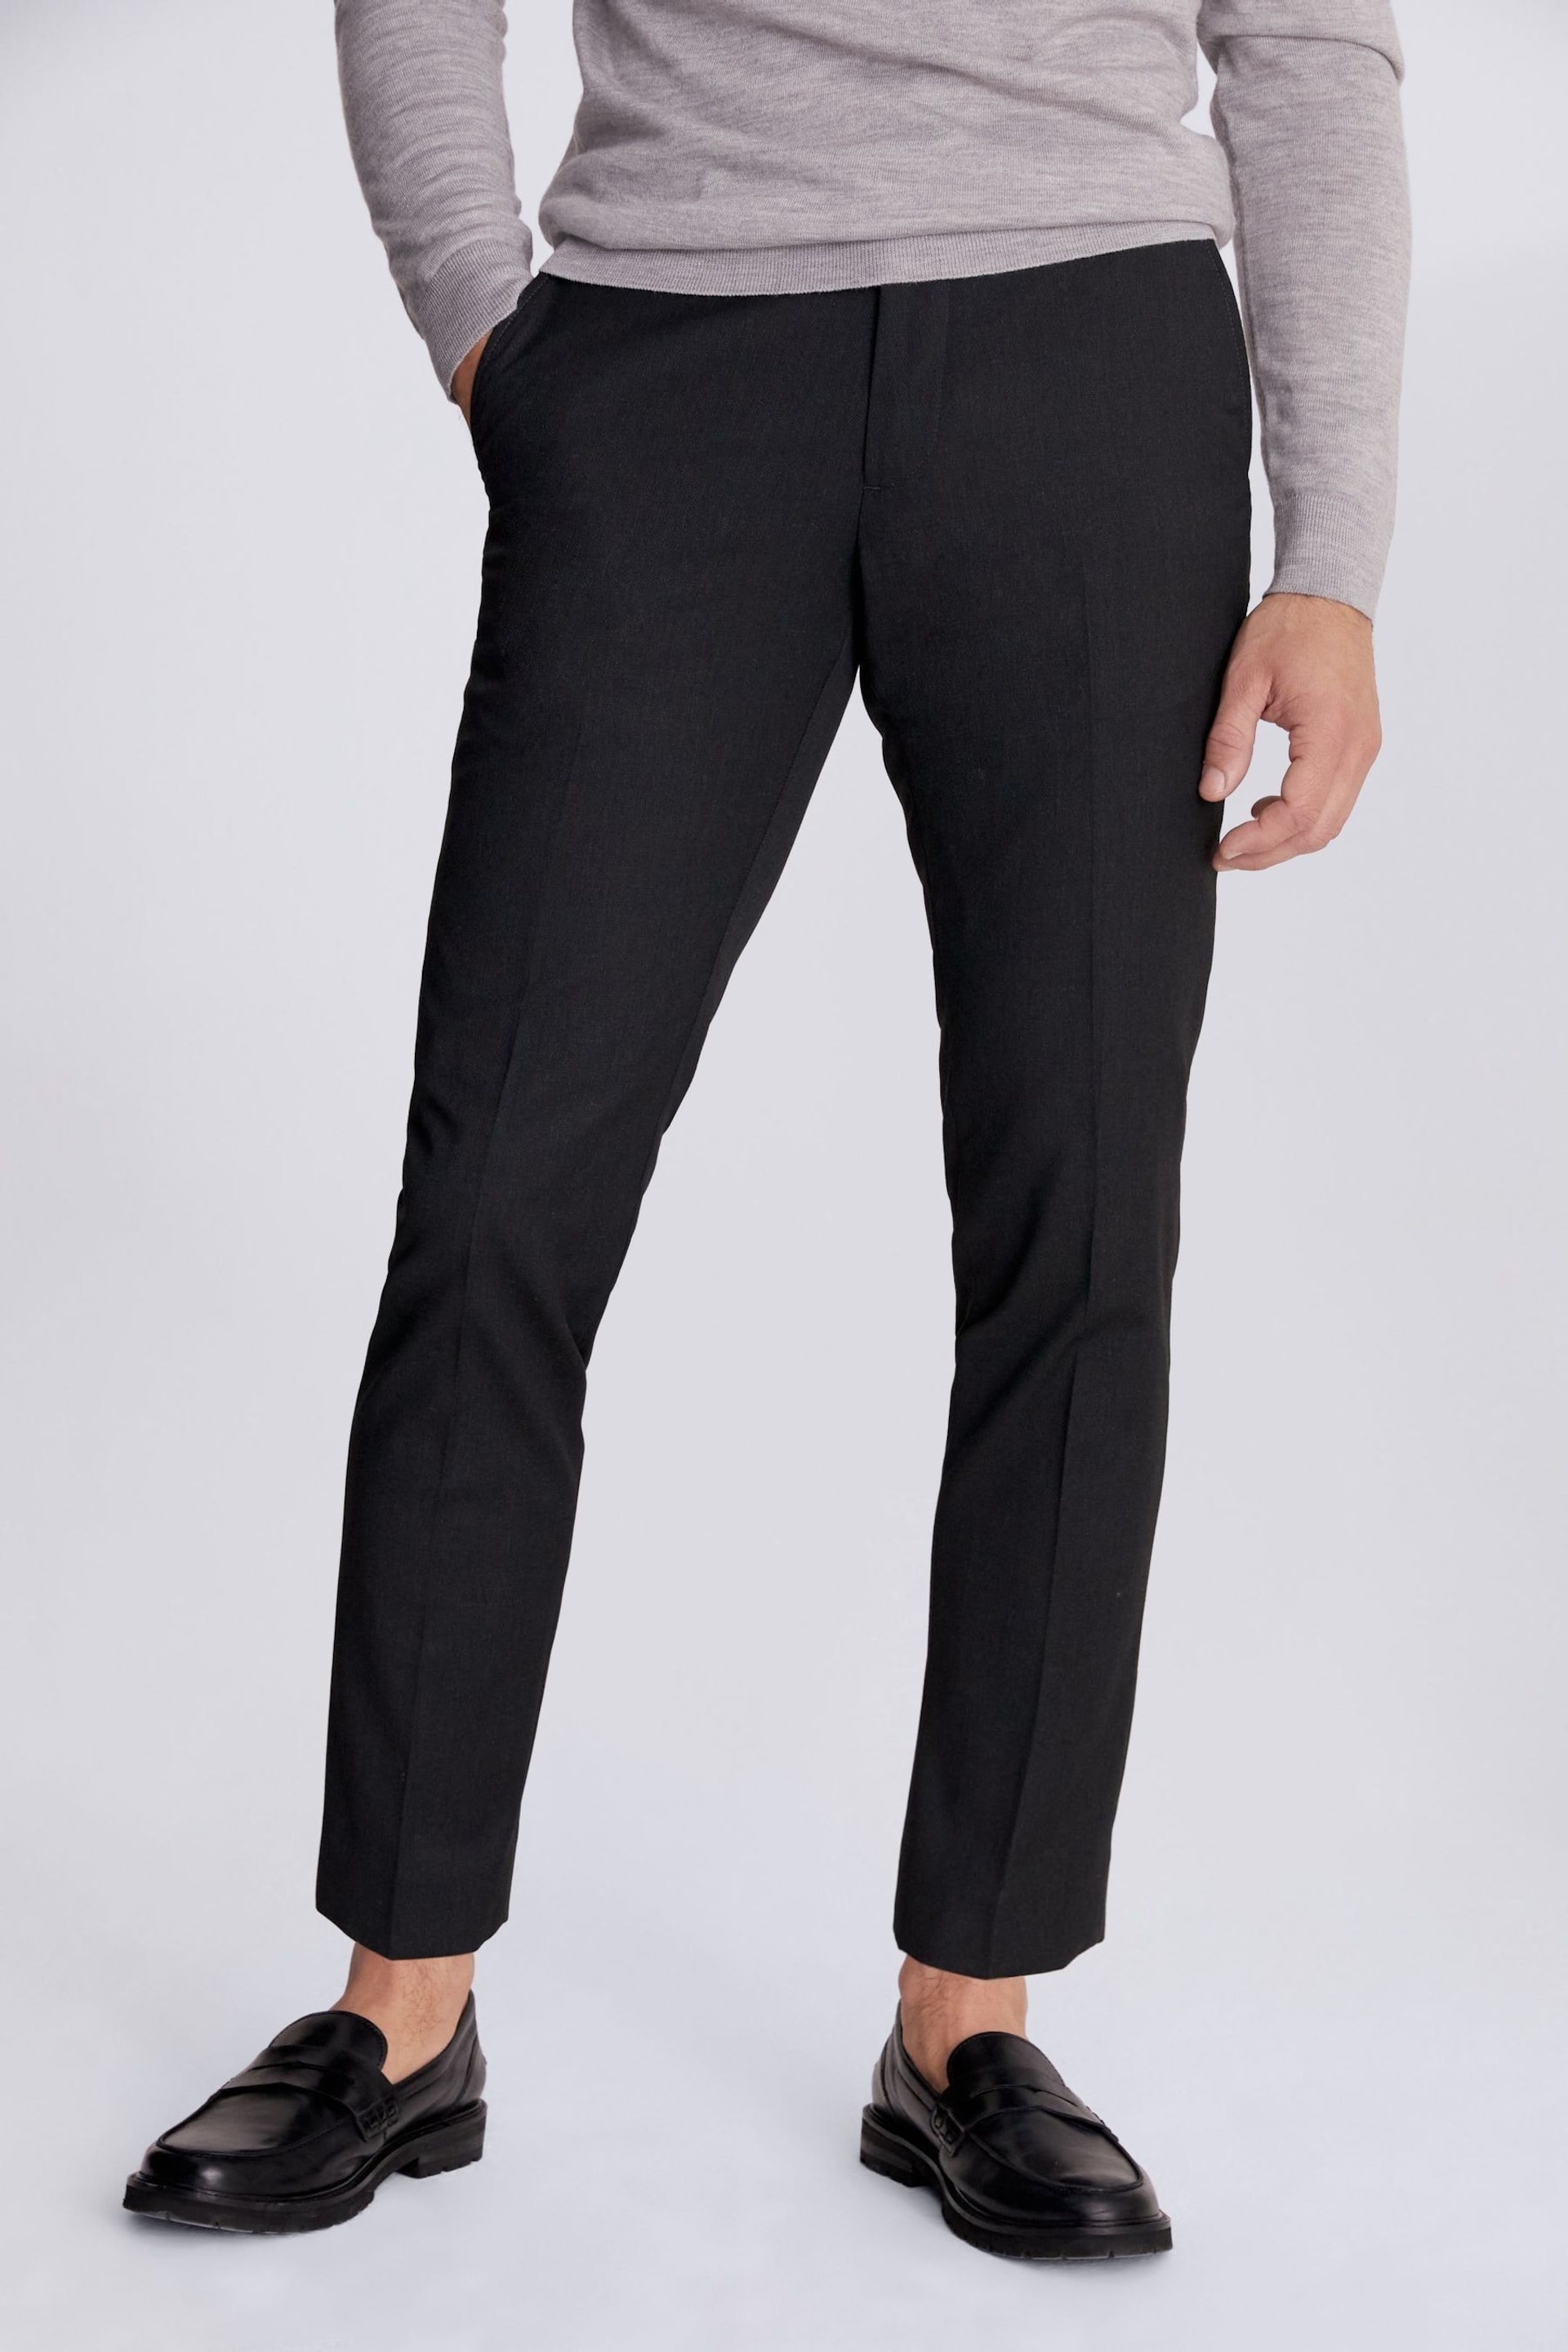 MOSS Charcoal Grey Tailored Stretch Suit: Trousers - Image 1 of 3